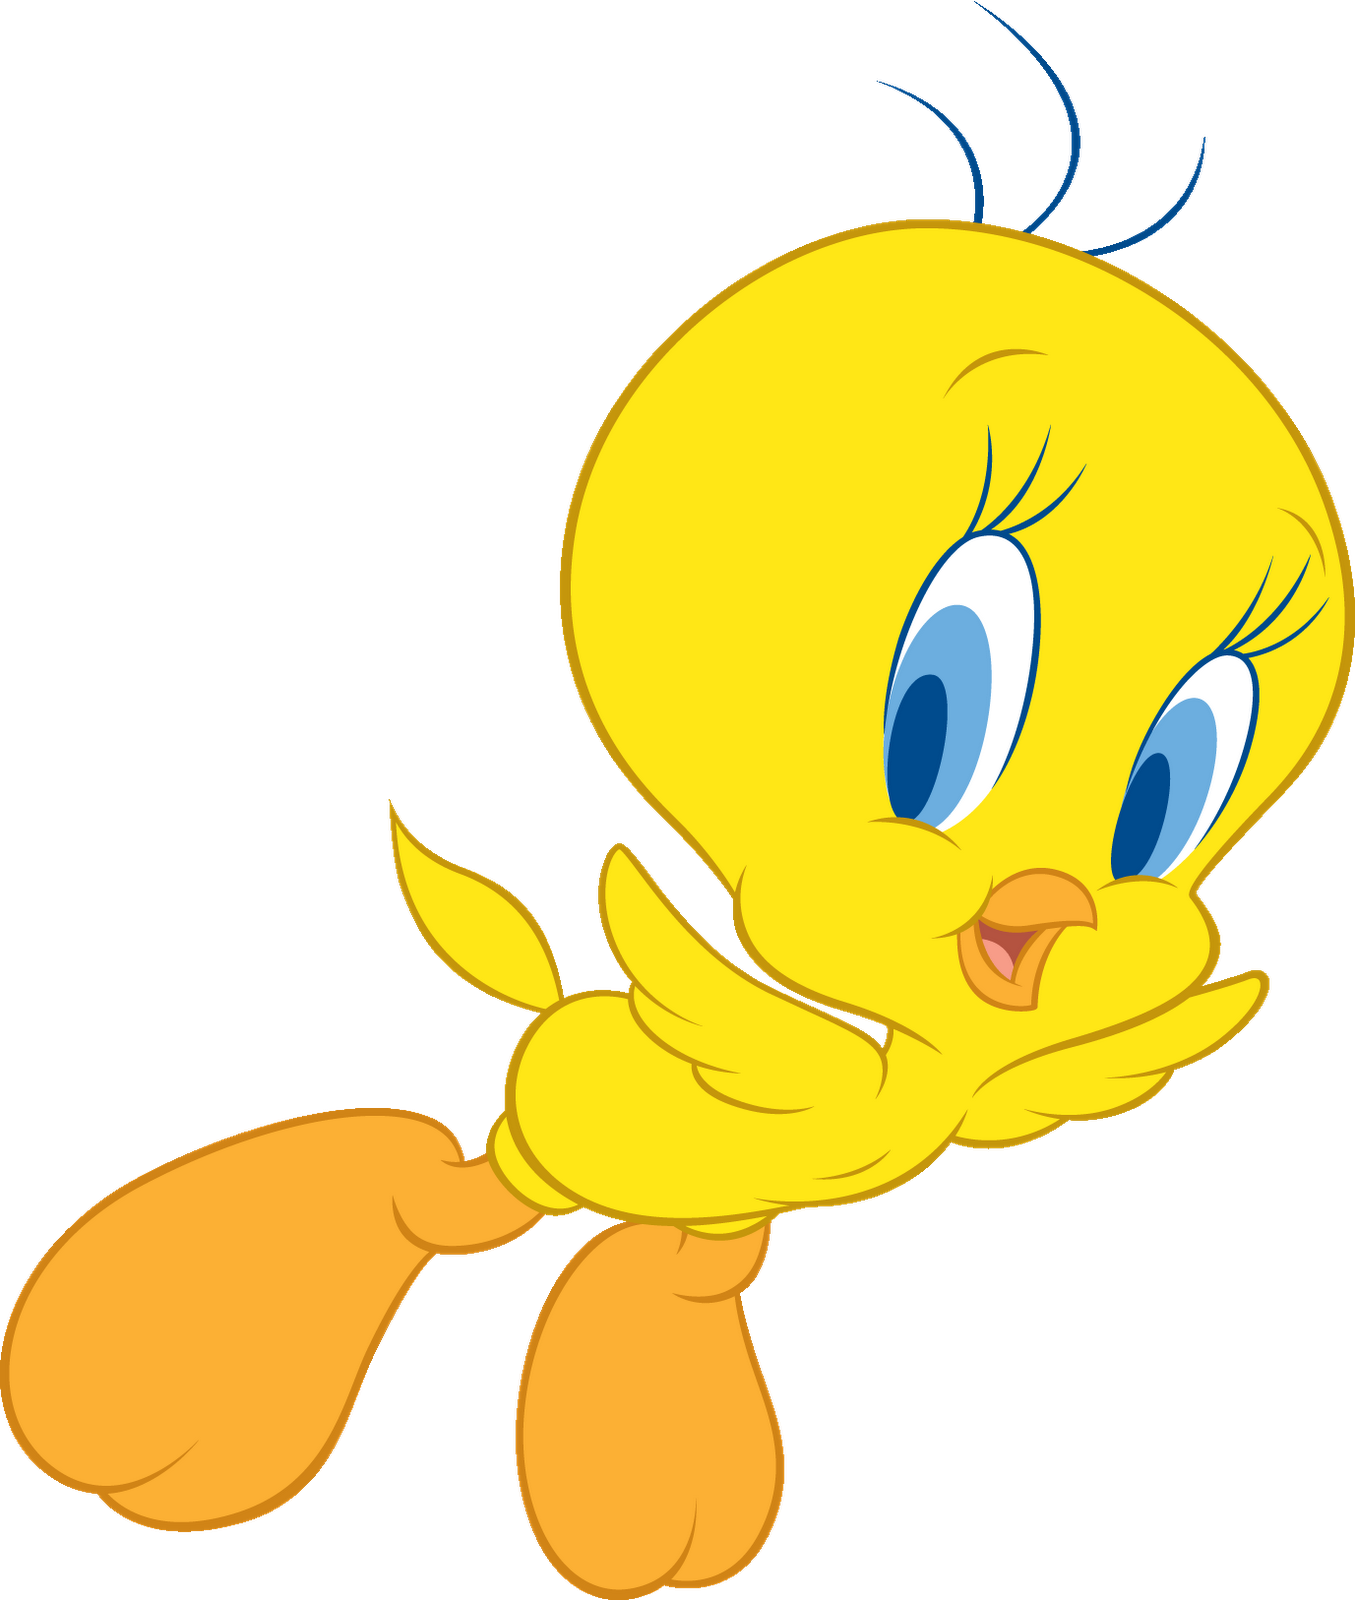 Tweety bird vector black and white clipart 2 image #18305